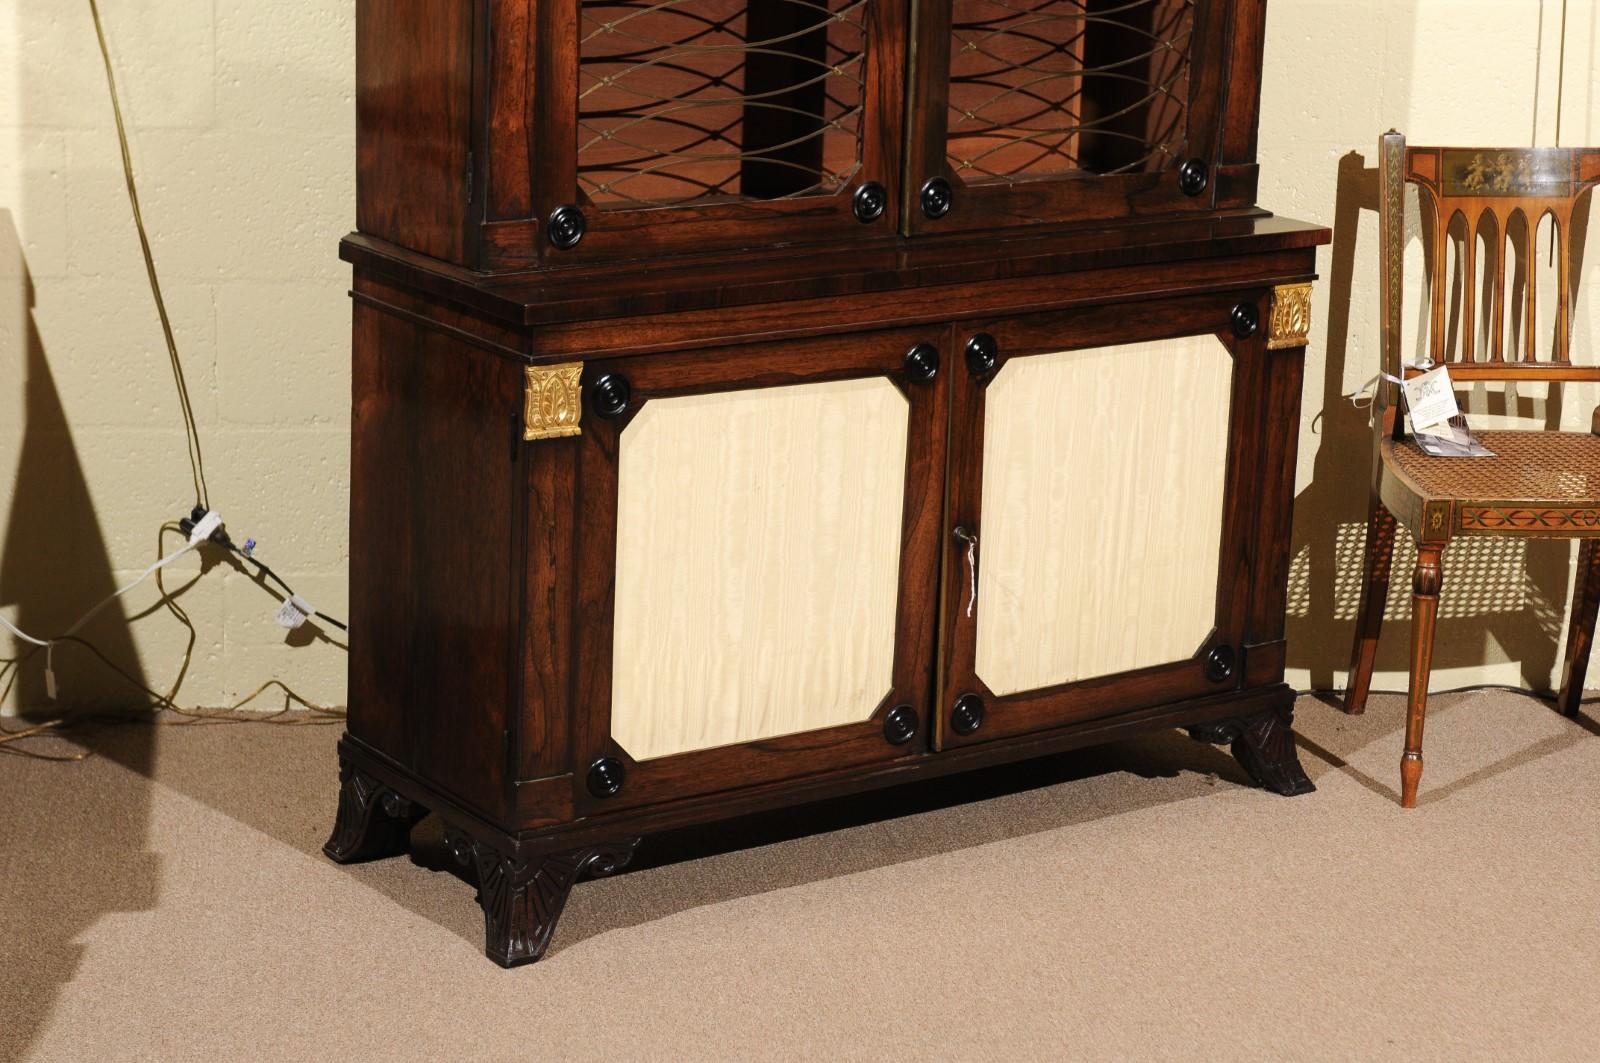 19th Century English Regency Style Rosewood Bookcase/Cabinet with Gilt Accents For Sale 7